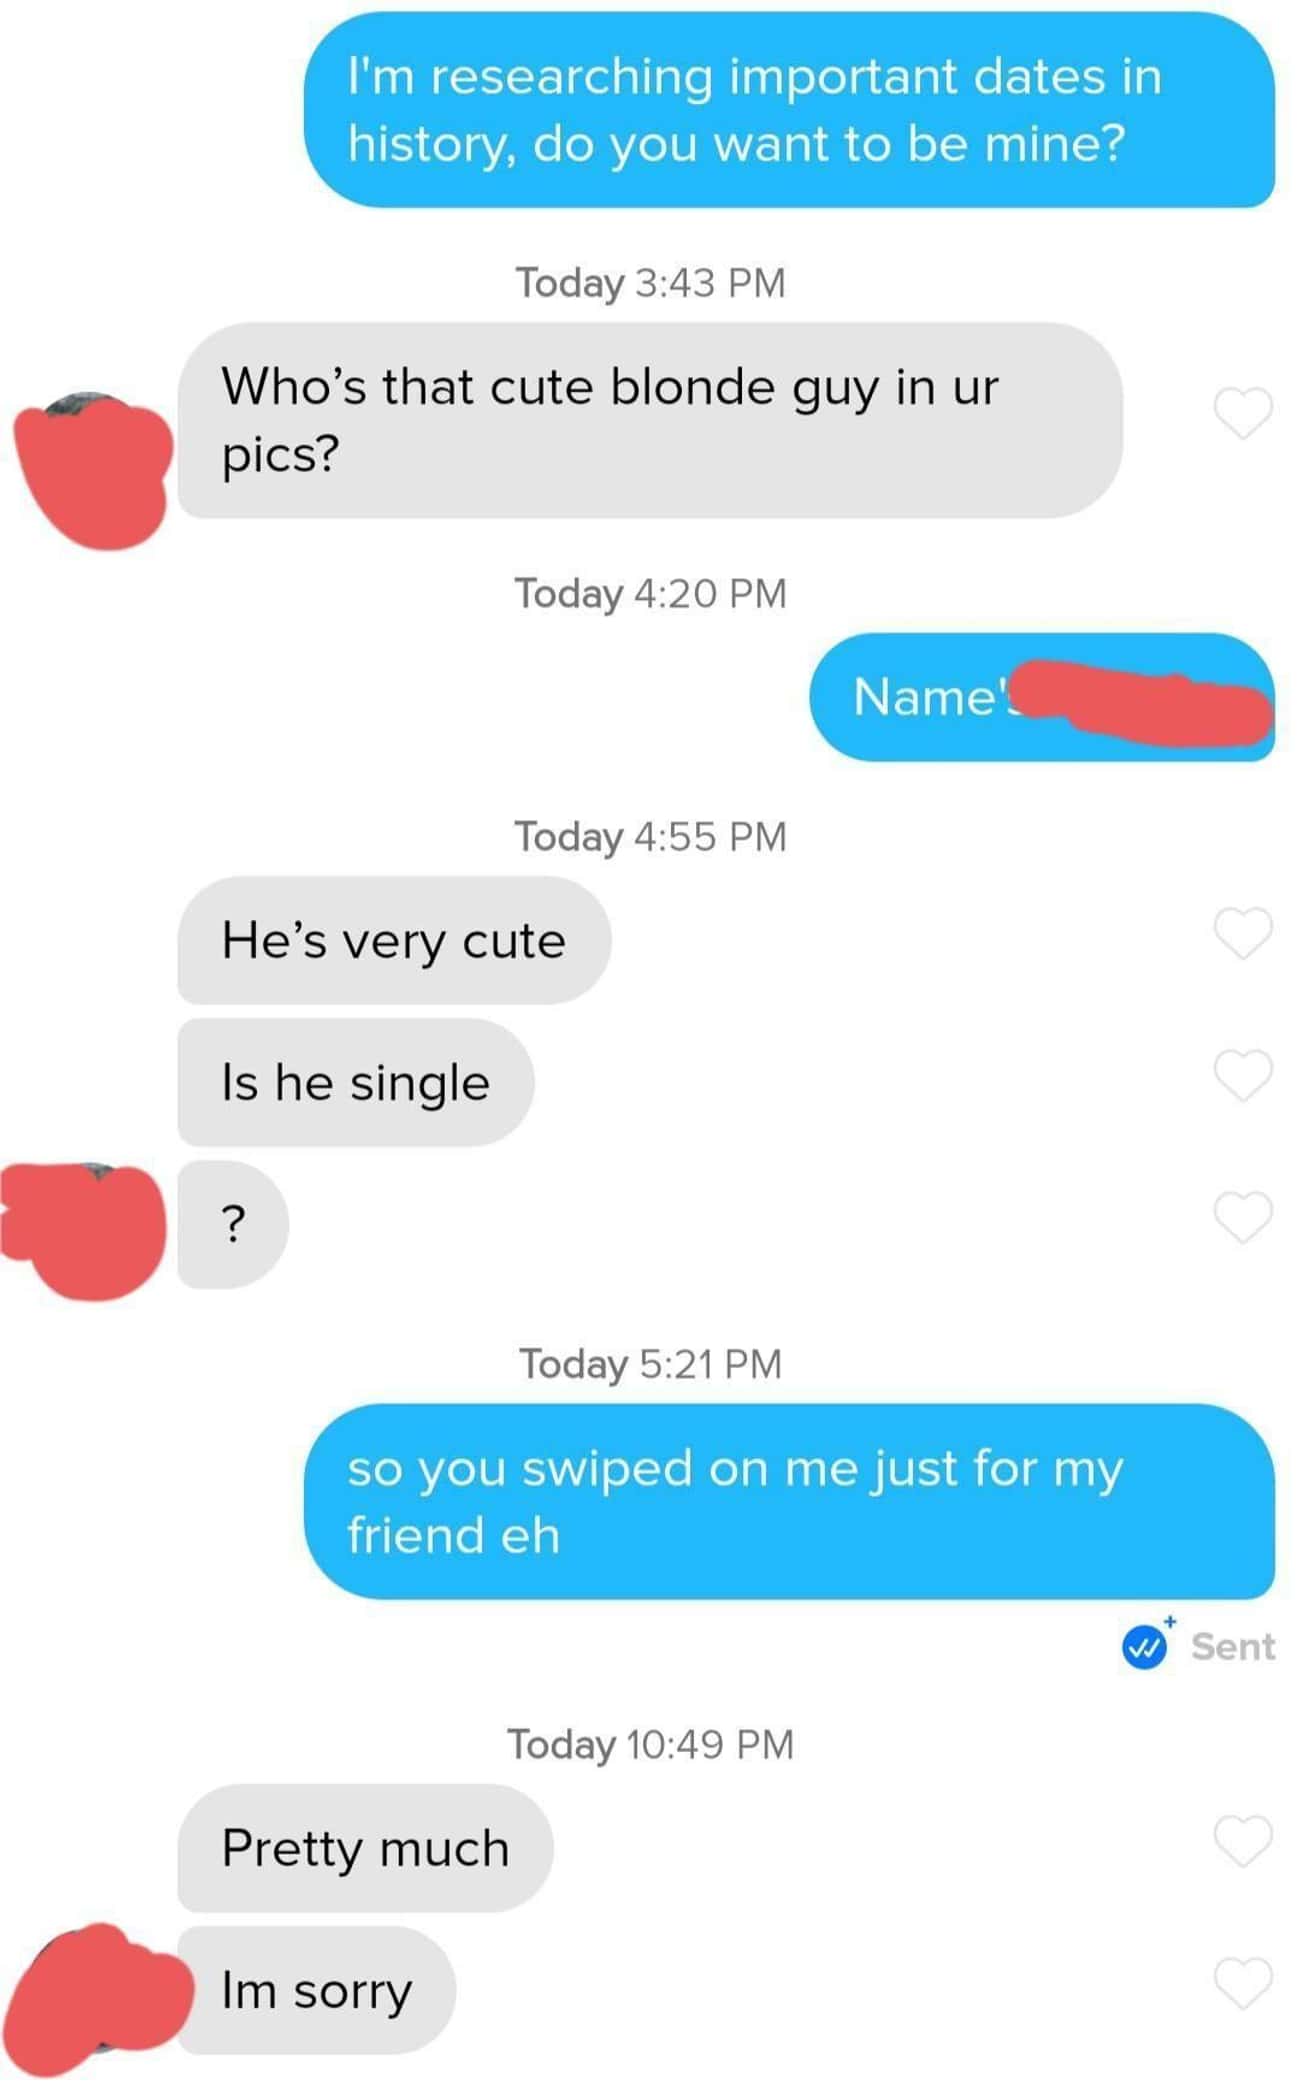 cringe posts - number - I'm researching important dates in history, do you want to be mine? Today Who's that cute blonde guy in ur pics? Today Name' Today He's very cute Is he single 0 0 0 ? Today so you swiped on me just for my friend eh w Sent Today Pre